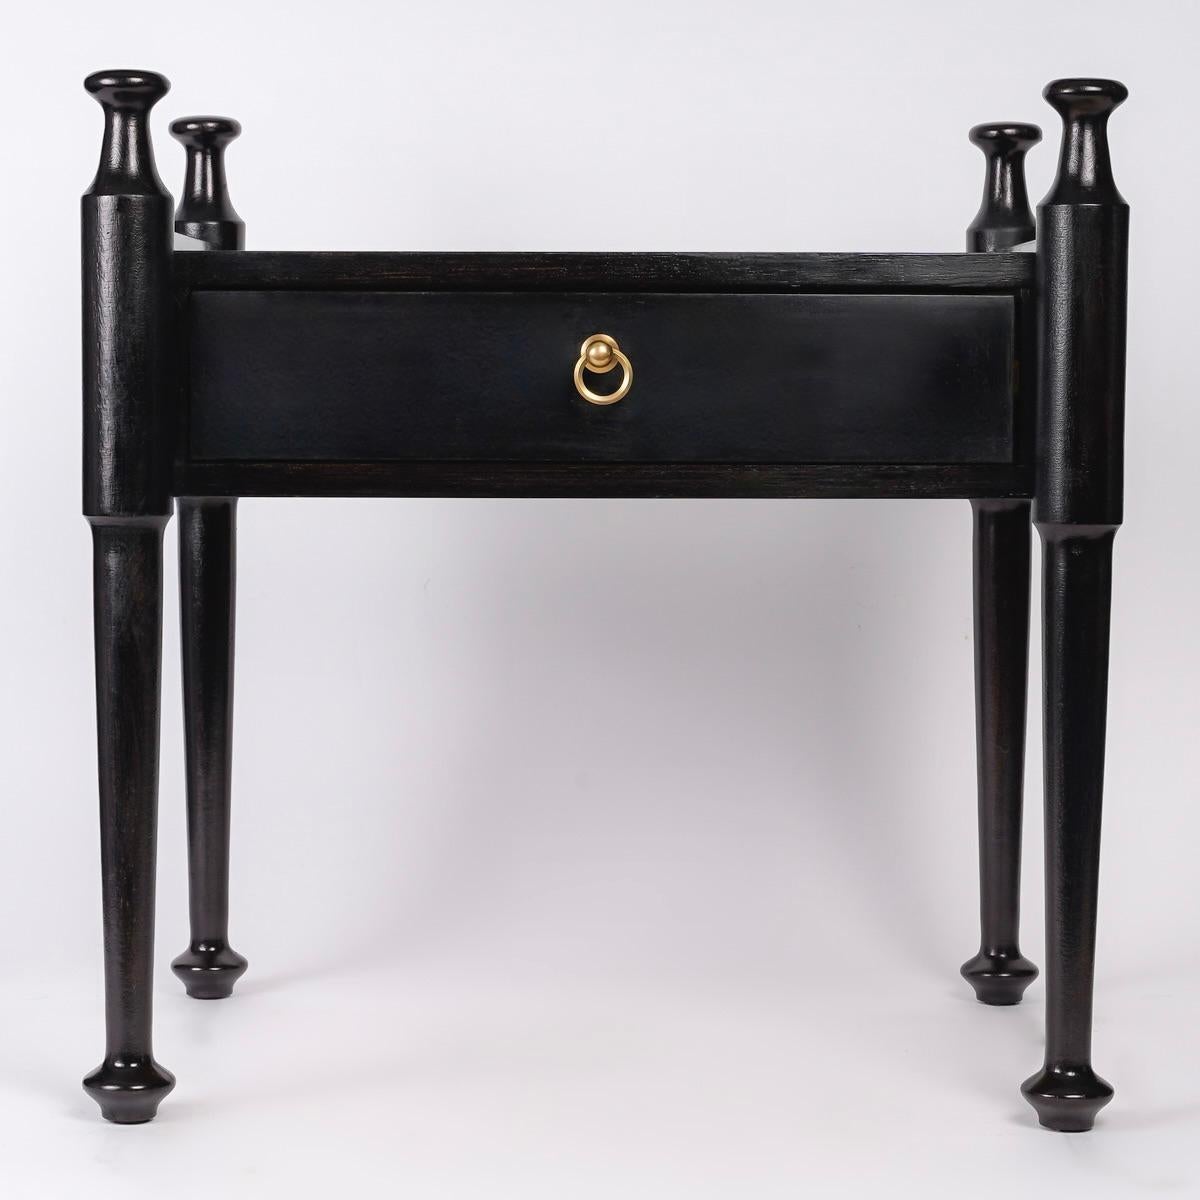 1960 Pair of elegant bedside tables by Proserpio Fratelli
Comprising a rectangular case in blackened teak with a drawer and a small gilded bronze handle, these tables are framed and rest on 4 tapered legs placed at the four corners of the bedside